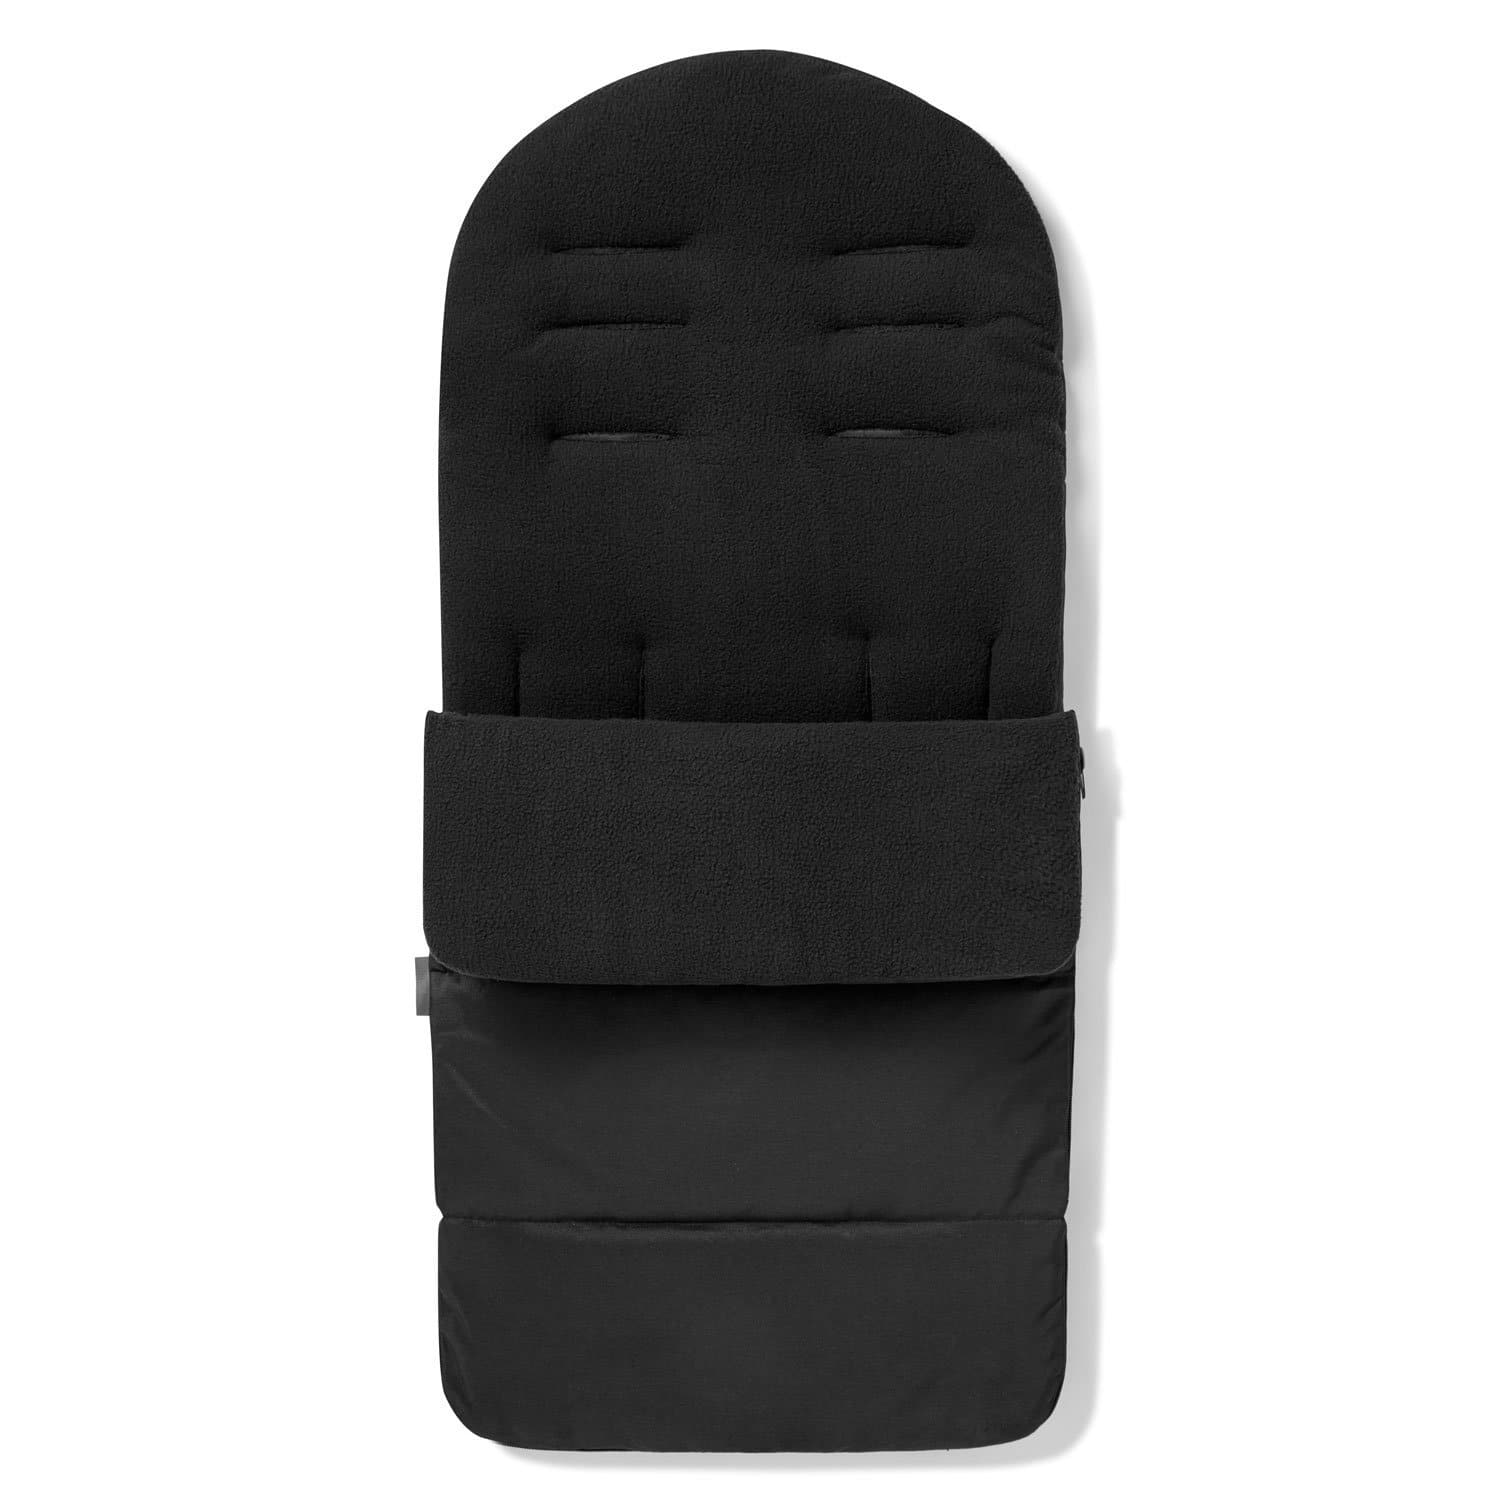 Premium Footmuff / Cosy Toes Compatible with Firstwheels - Black Jack / Fits All Models | For Your Little One